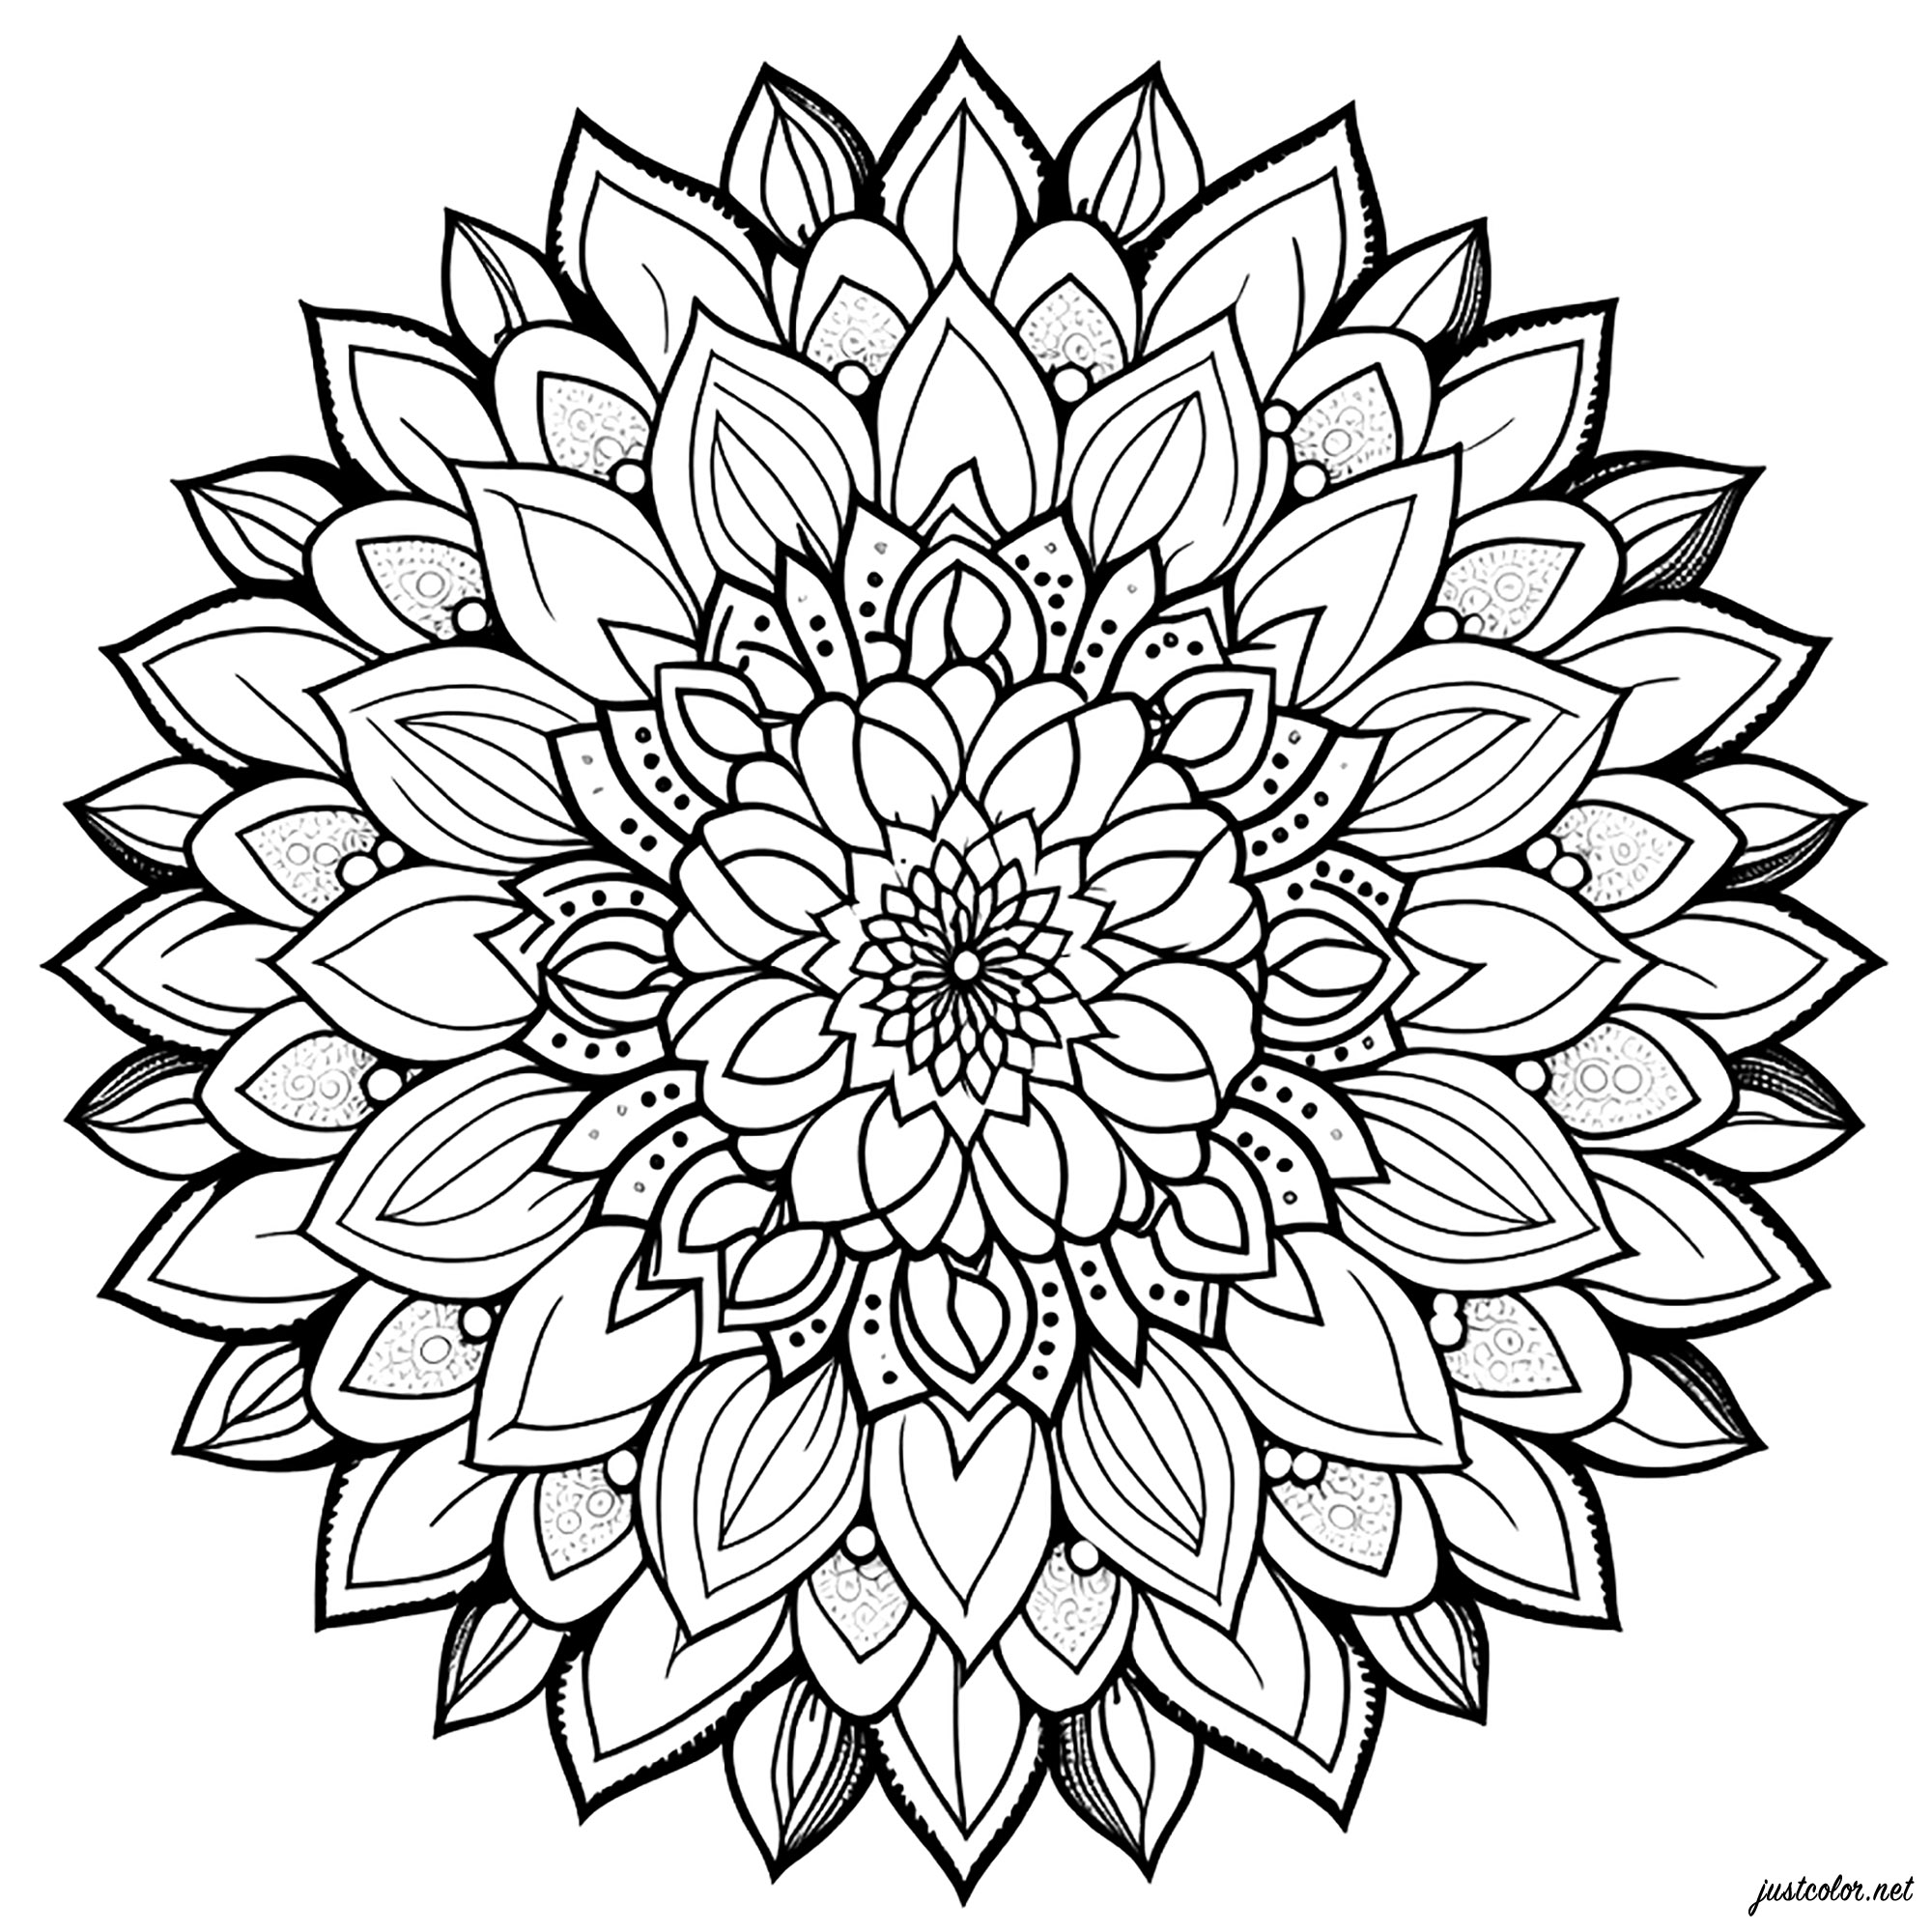 Simple mandala with petals. This simple petal mandala coloring page is very pretty and easy to make. It is composed of flowers and flower petals that fit perfectly into each other.